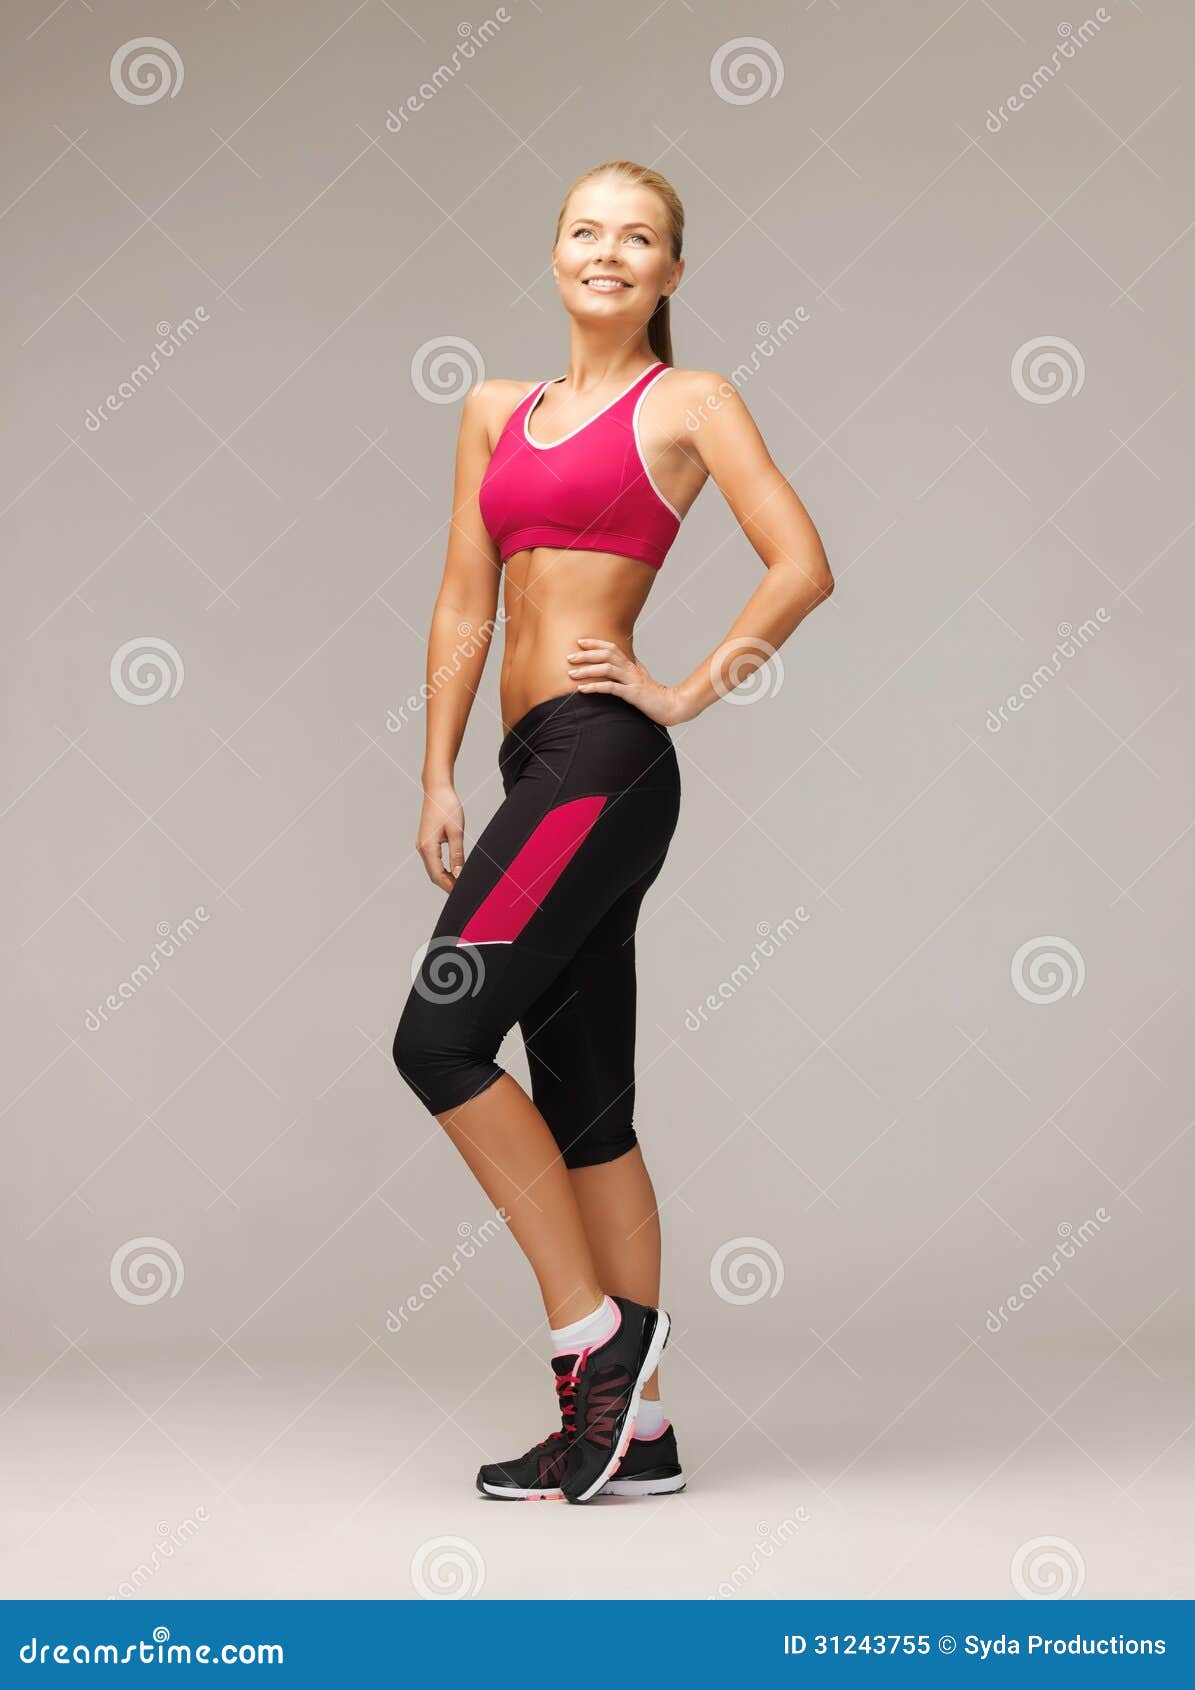 Woman in sportswear stock image. Image of muscles, pumping - 31243755